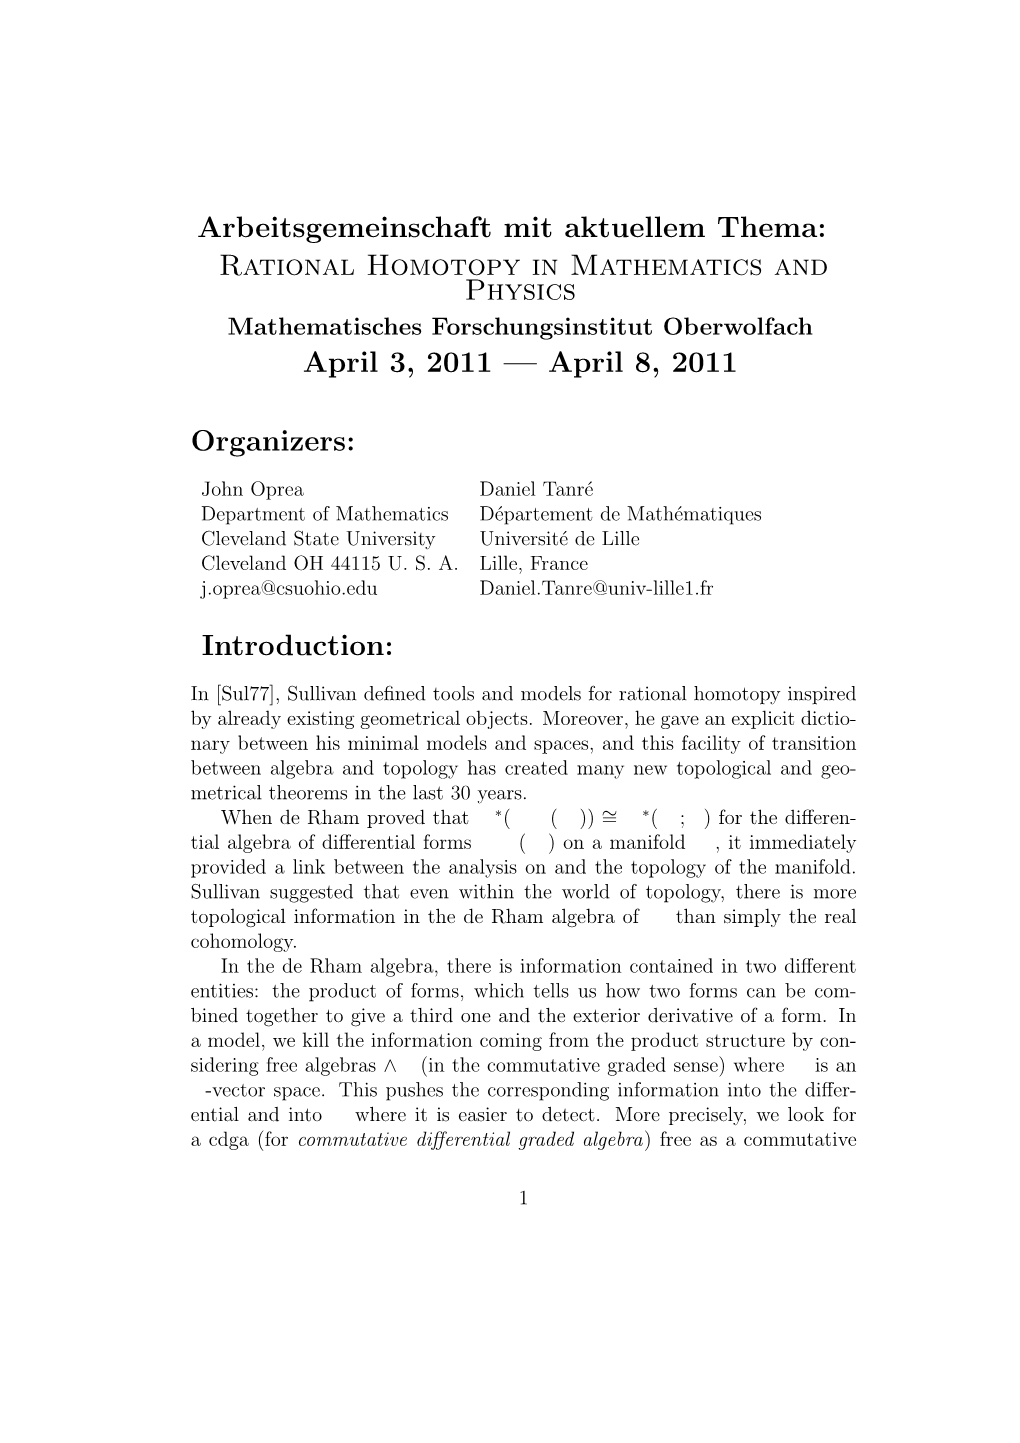 Rational Homotopy in Mathematics and Physics April 3, 2011